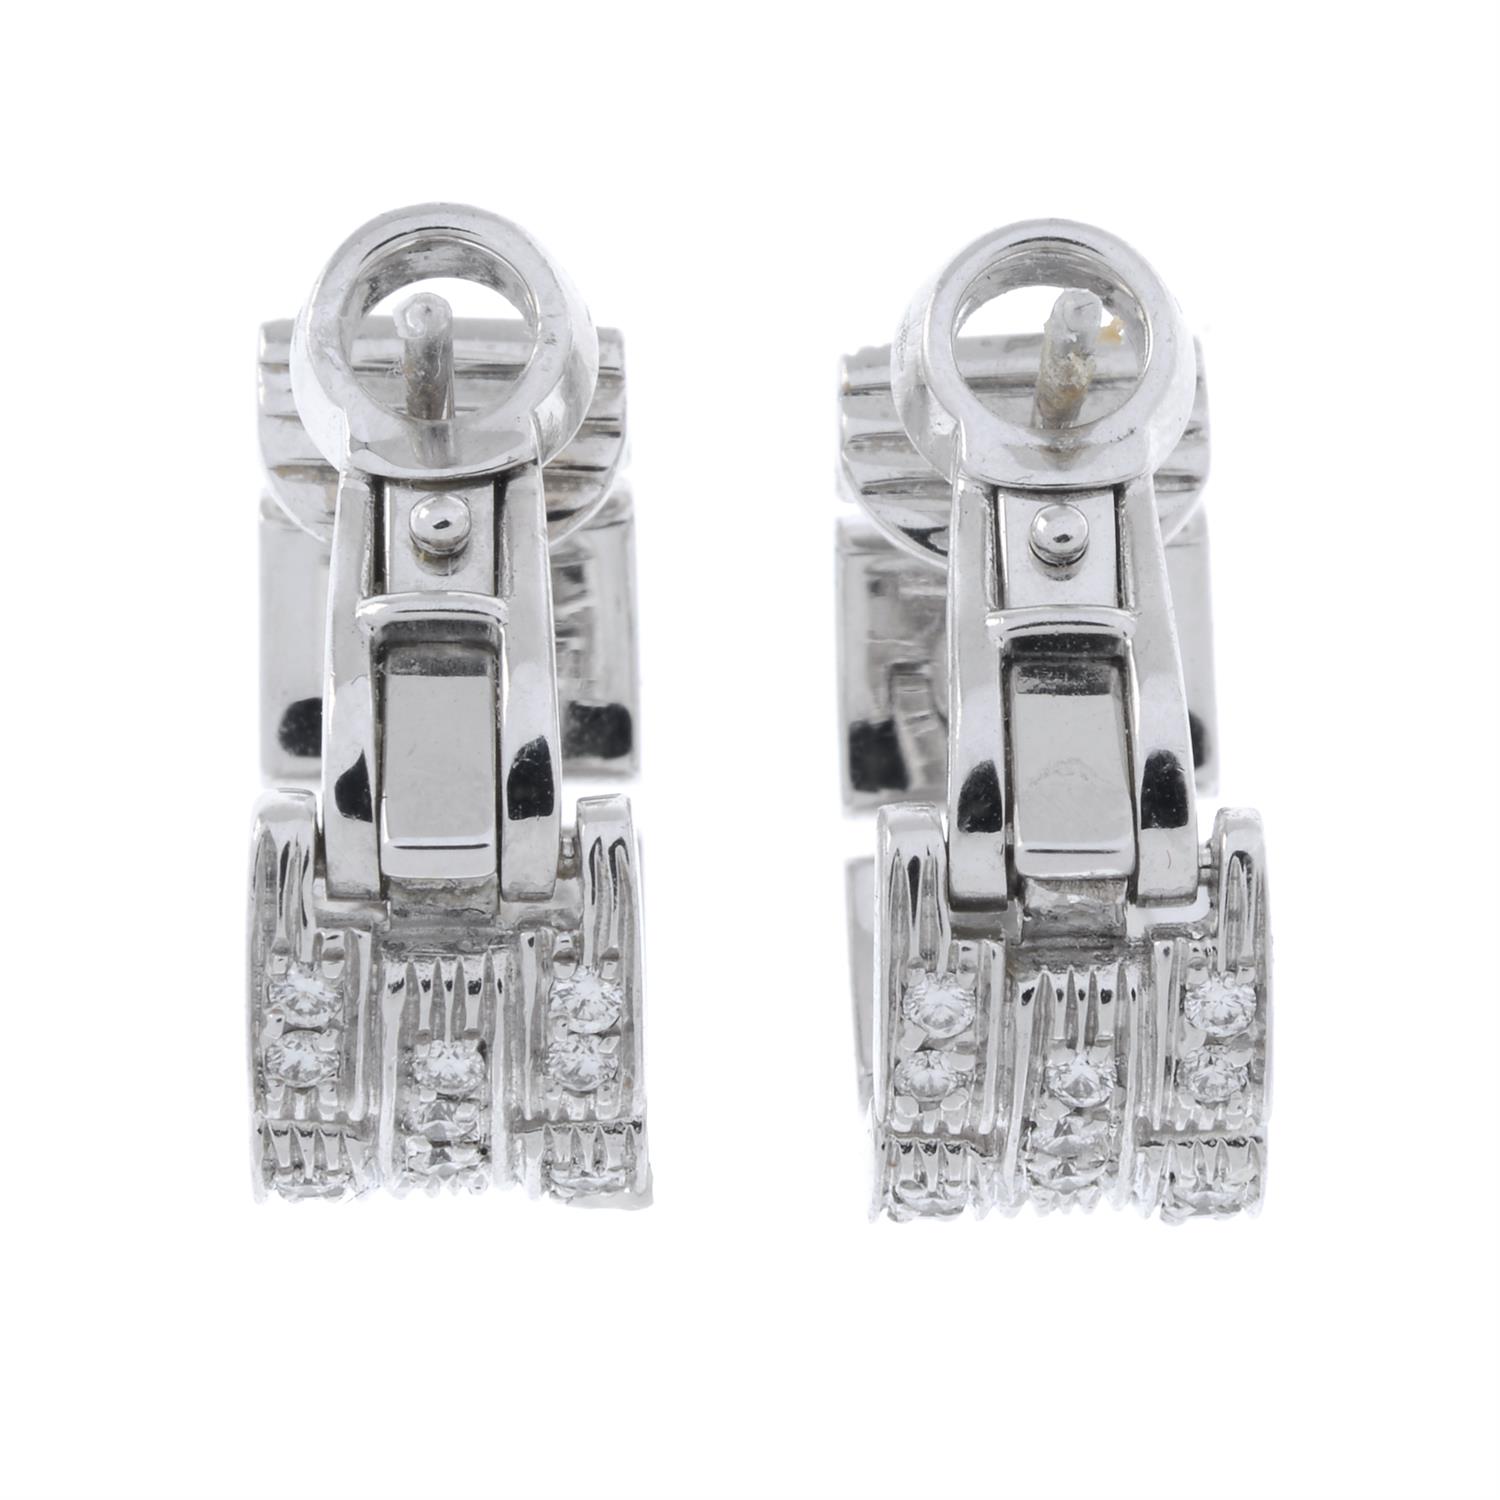 Diamond 'Maillon Panthère' earrings, by Cartier - Image 3 of 3